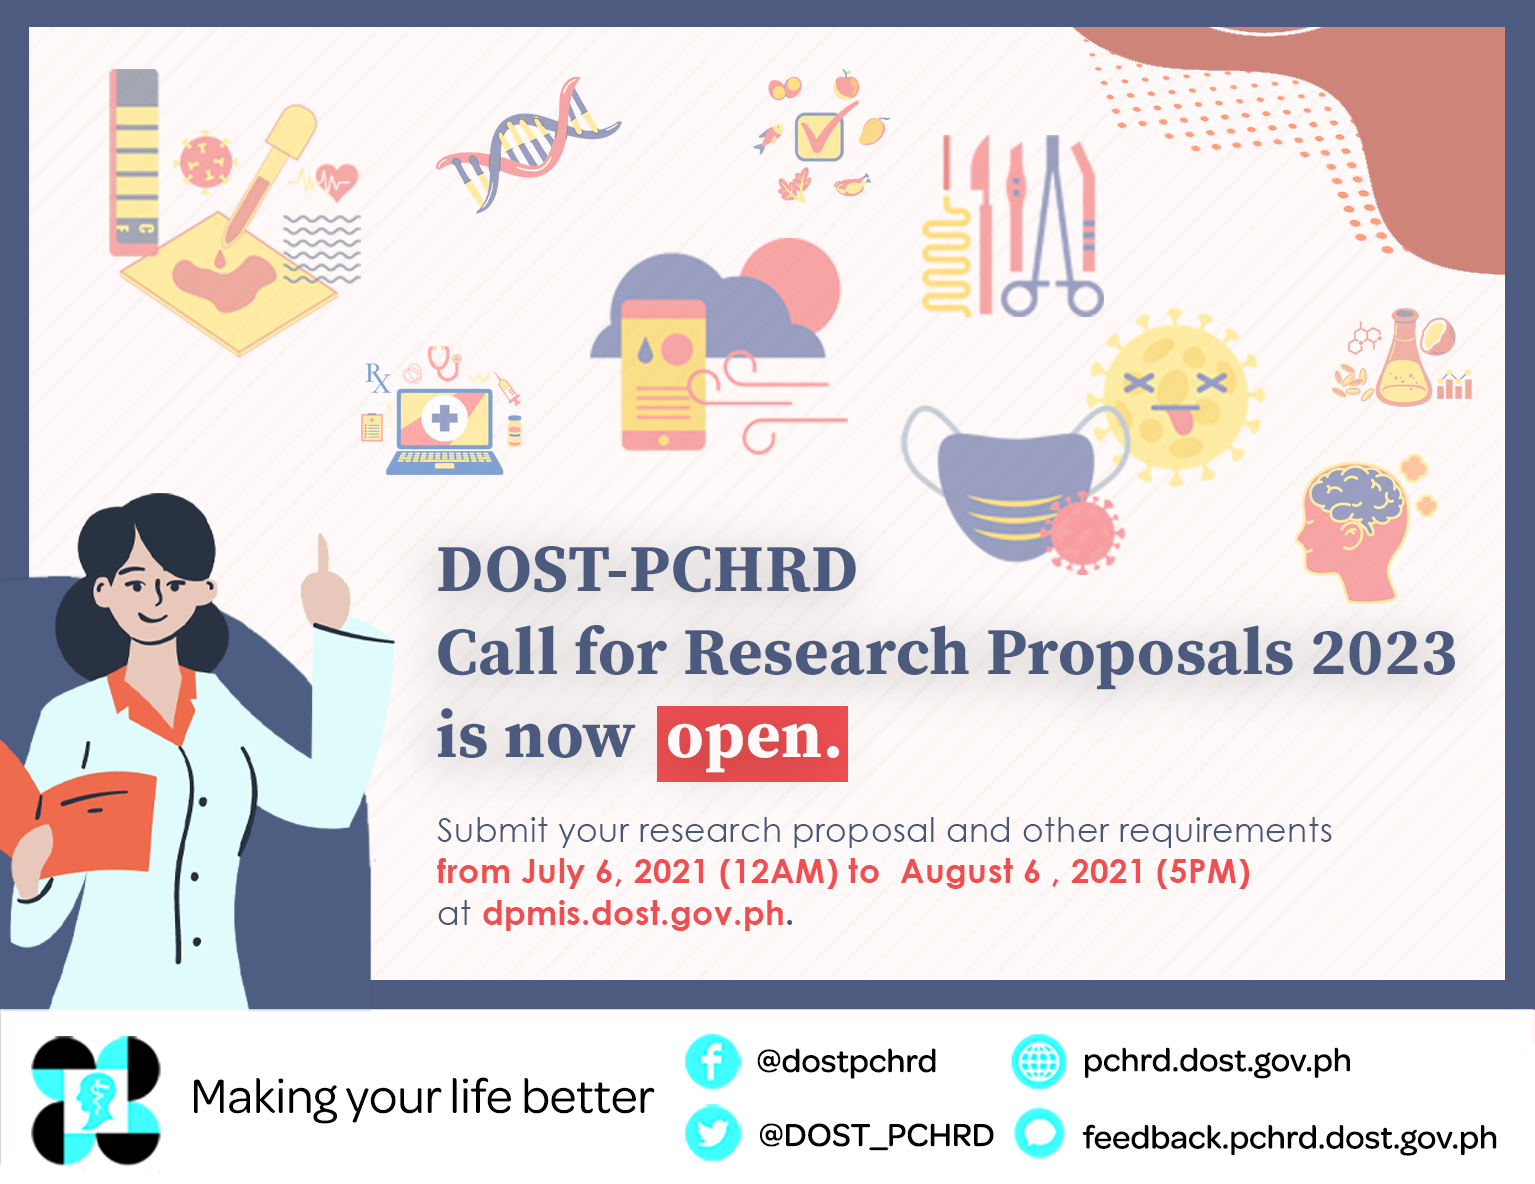 dost pchrd call for research proposals 2023 now open